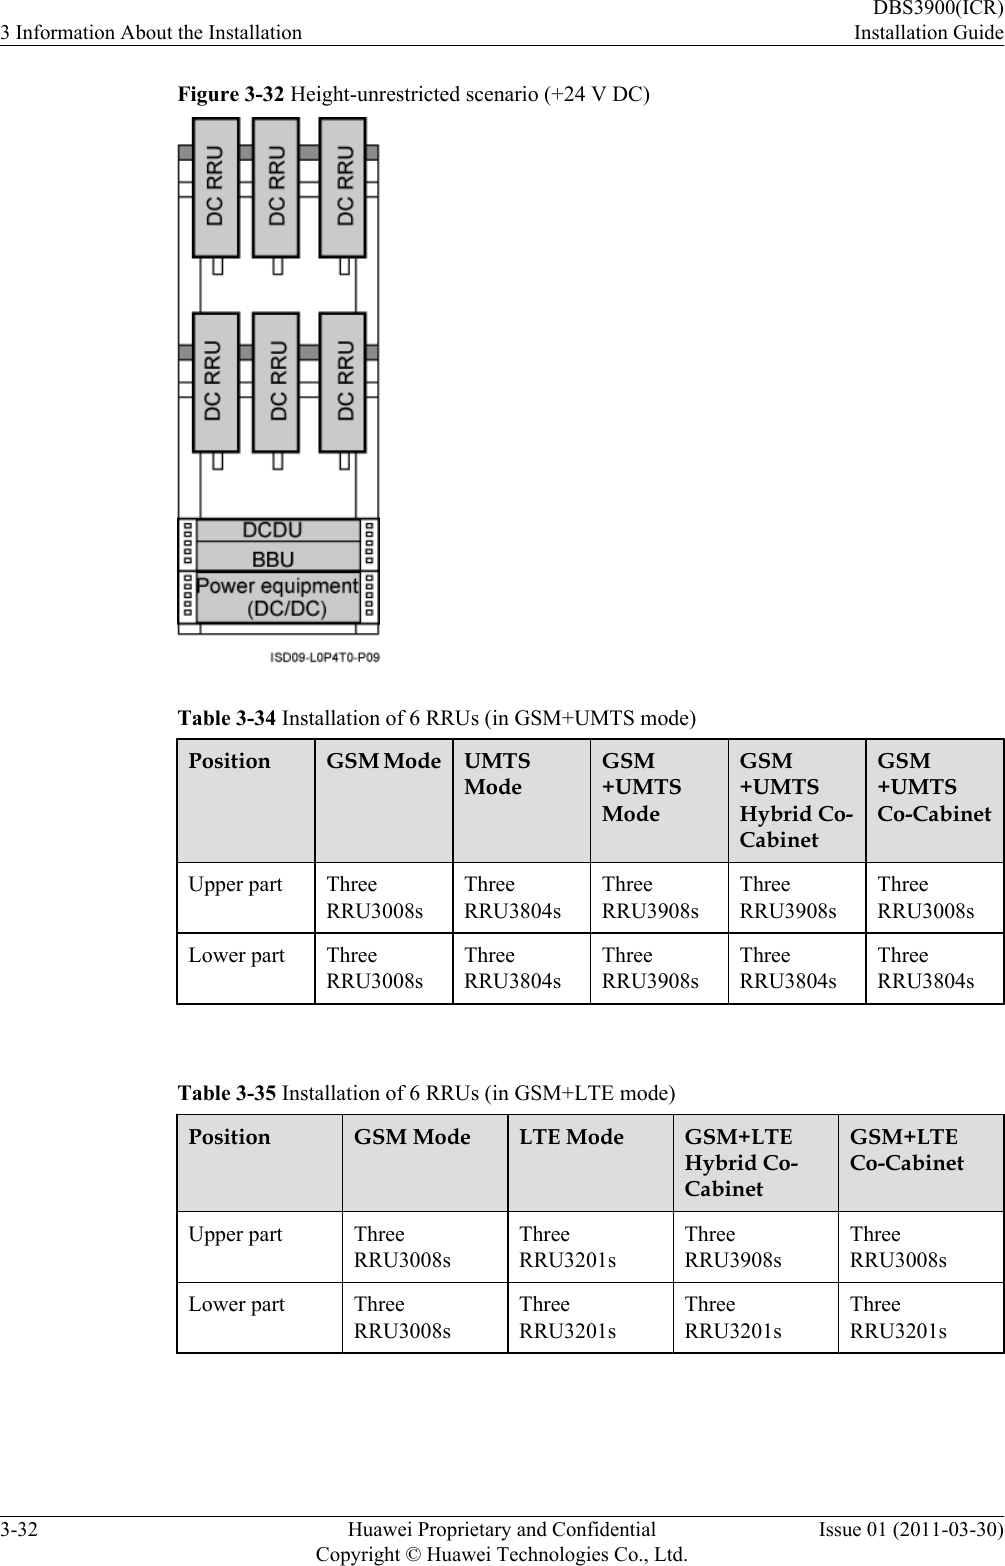 Figure 3-32 Height-unrestricted scenario (+24 V DC)Table 3-34 Installation of 6 RRUs (in GSM+UMTS mode)Position GSM Mode UMTSModeGSM+UMTSModeGSM+UMTSHybrid Co-CabinetGSM+UMTSCo-CabinetUpper part ThreeRRU3008sThreeRRU3804sThreeRRU3908sThreeRRU3908sThreeRRU3008sLower part ThreeRRU3008sThreeRRU3804sThreeRRU3908sThreeRRU3804sThreeRRU3804s Table 3-35 Installation of 6 RRUs (in GSM+LTE mode)Position GSM Mode LTE Mode GSM+LTEHybrid Co-CabinetGSM+LTECo-CabinetUpper part ThreeRRU3008sThreeRRU3201sThreeRRU3908sThreeRRU3008sLower part ThreeRRU3008sThreeRRU3201sThreeRRU3201sThreeRRU3201s 3 Information About the InstallationDBS3900(ICR)Installation Guide3-32 Huawei Proprietary and ConfidentialCopyright © Huawei Technologies Co., Ltd.Issue 01 (2011-03-30)